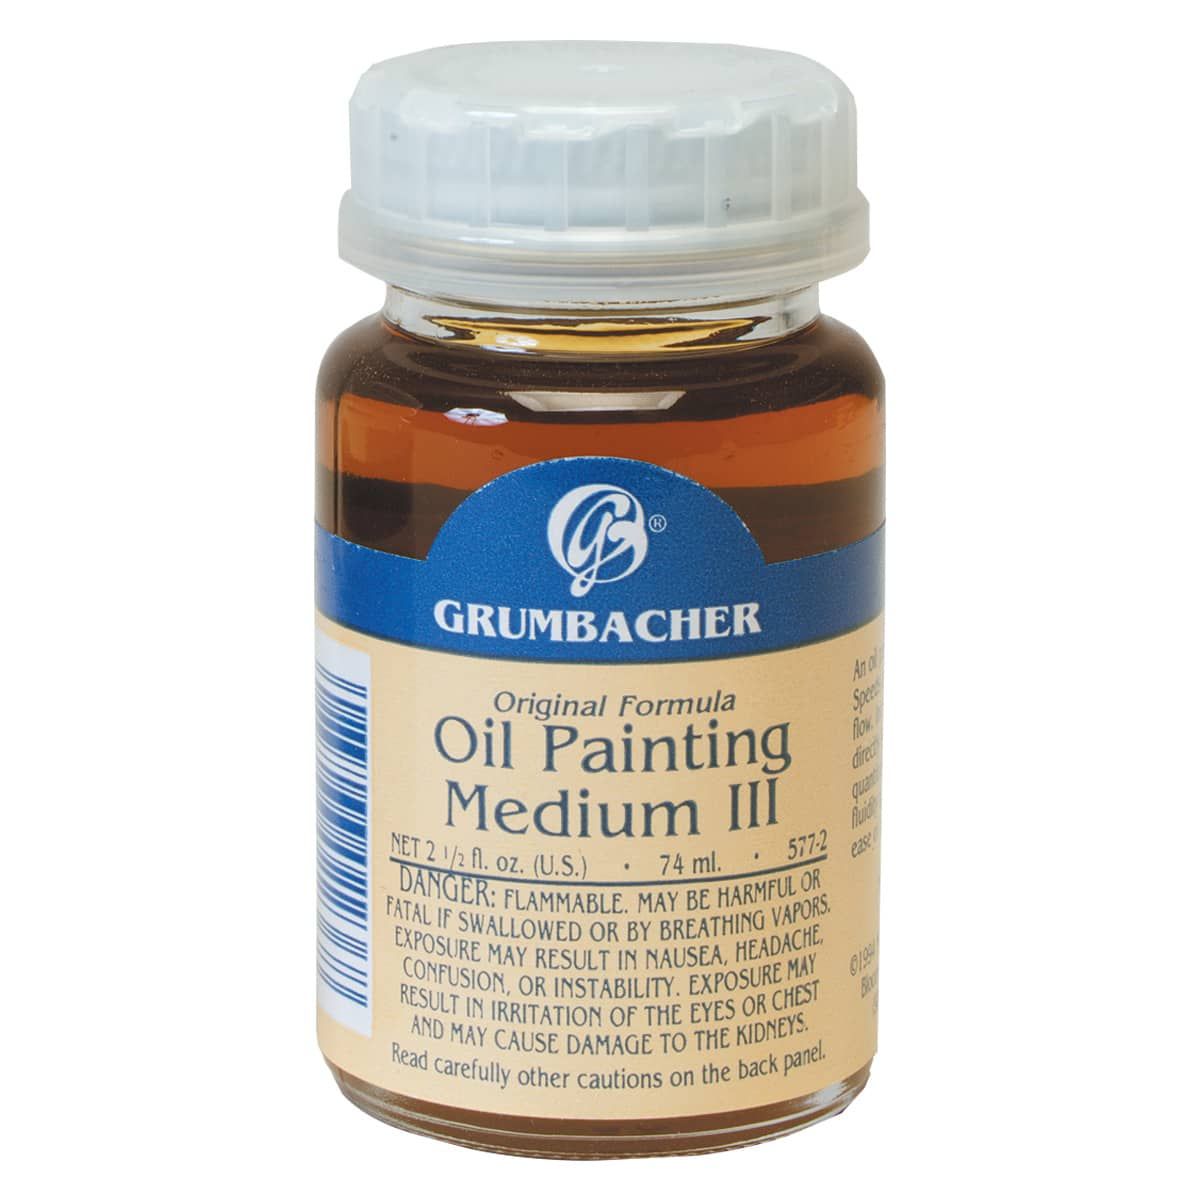 Grumbacher Pre-Tested Oil Painting Medium No. 3, 2.5 oz Bottle